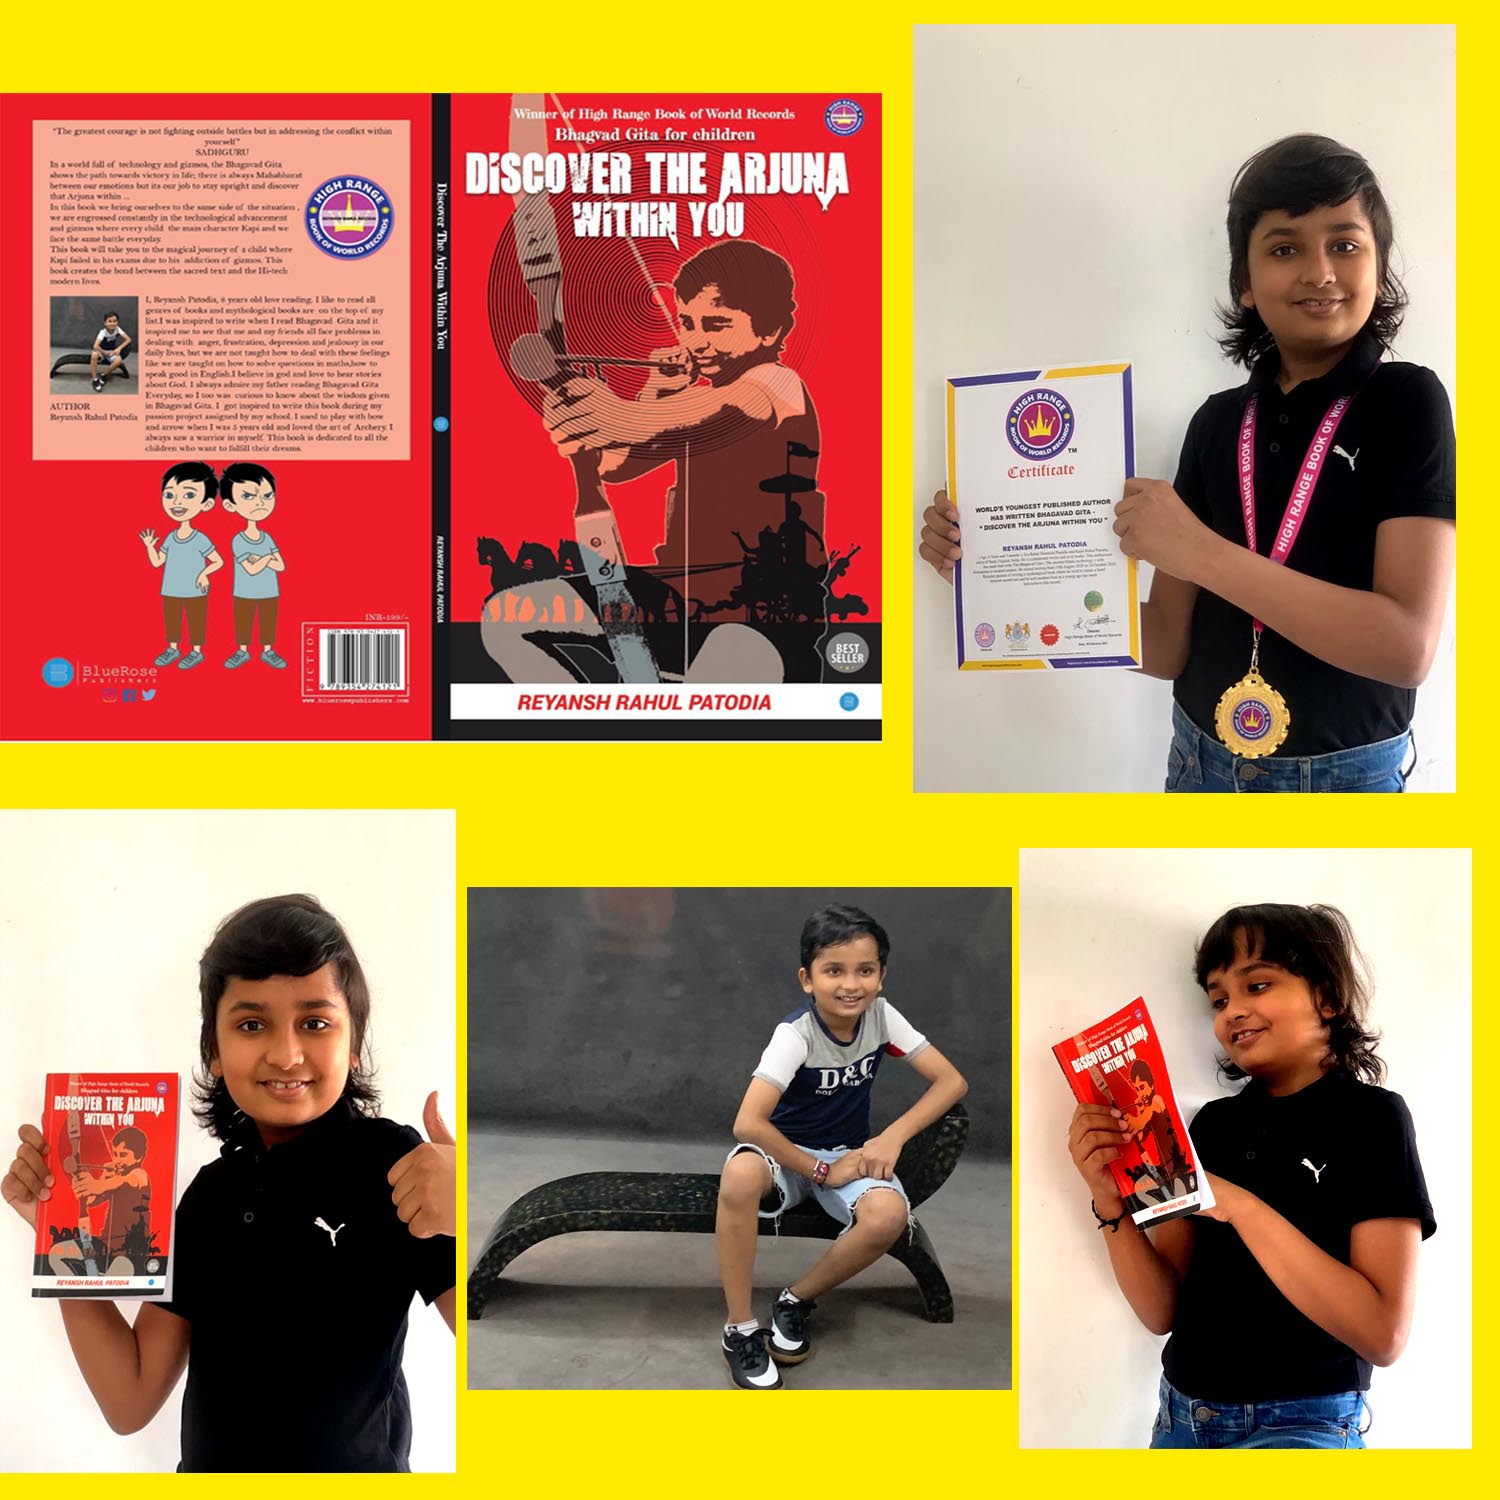 WORLD’S YOUNGEST PUBLISHED AUTHOR HAS WRITTEN BHAGAVAD GITA – “ DISCOVER THE ARJUNA WITHIN YOU ”